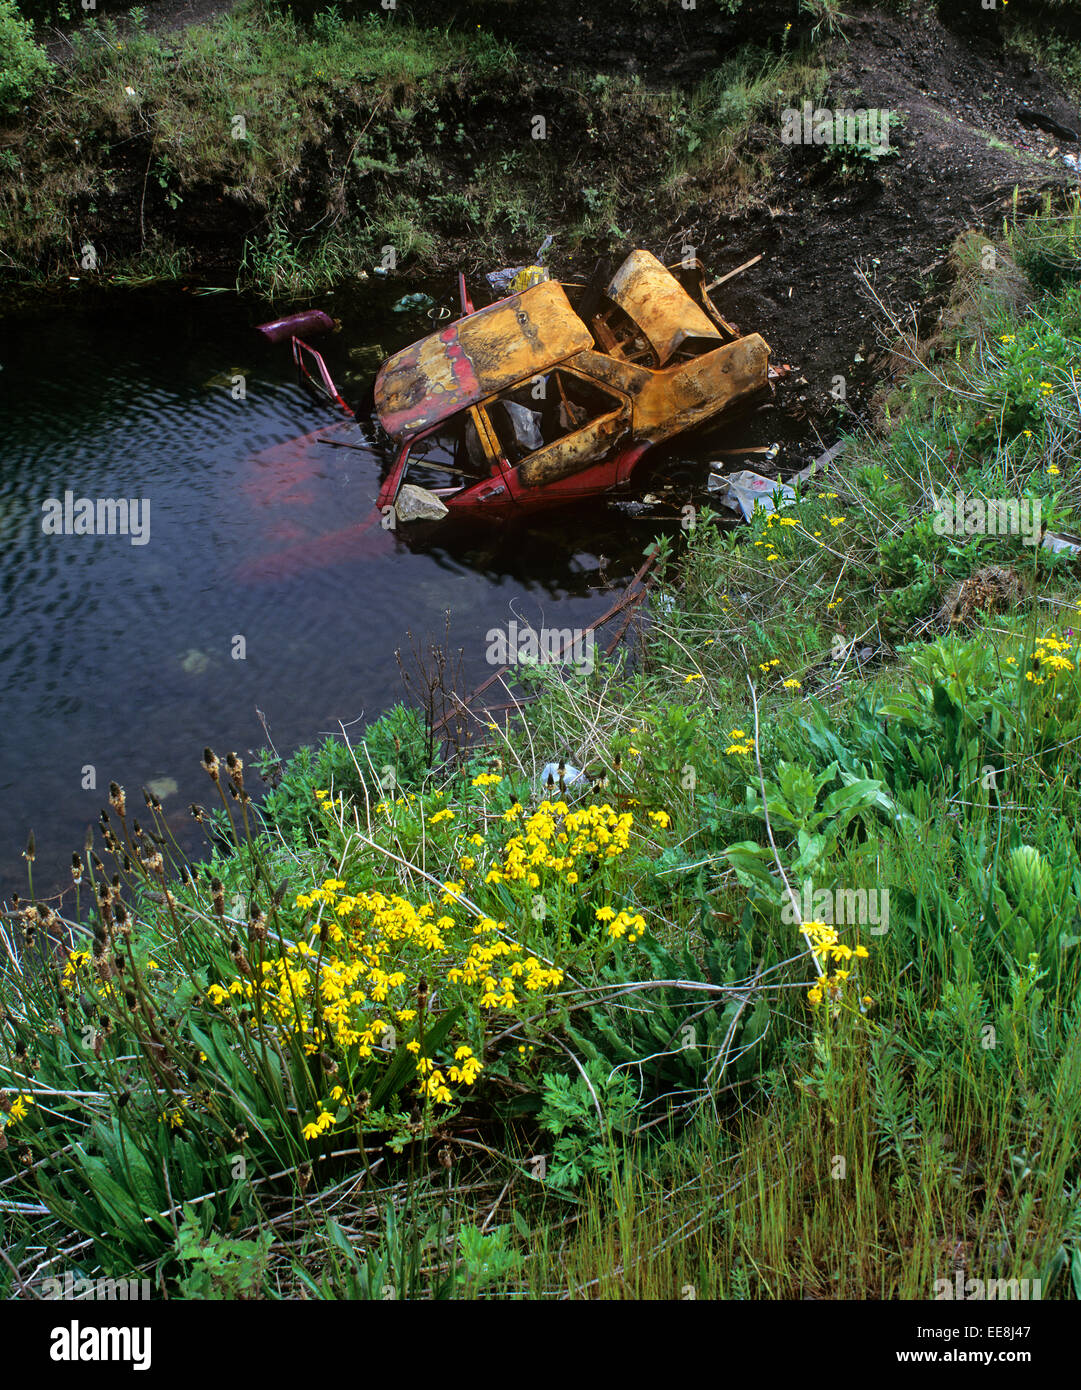 A dumped car in a pond on waste ground near Wigan, Lancashire. Marsh ragwort in the foreground. Stock Photo